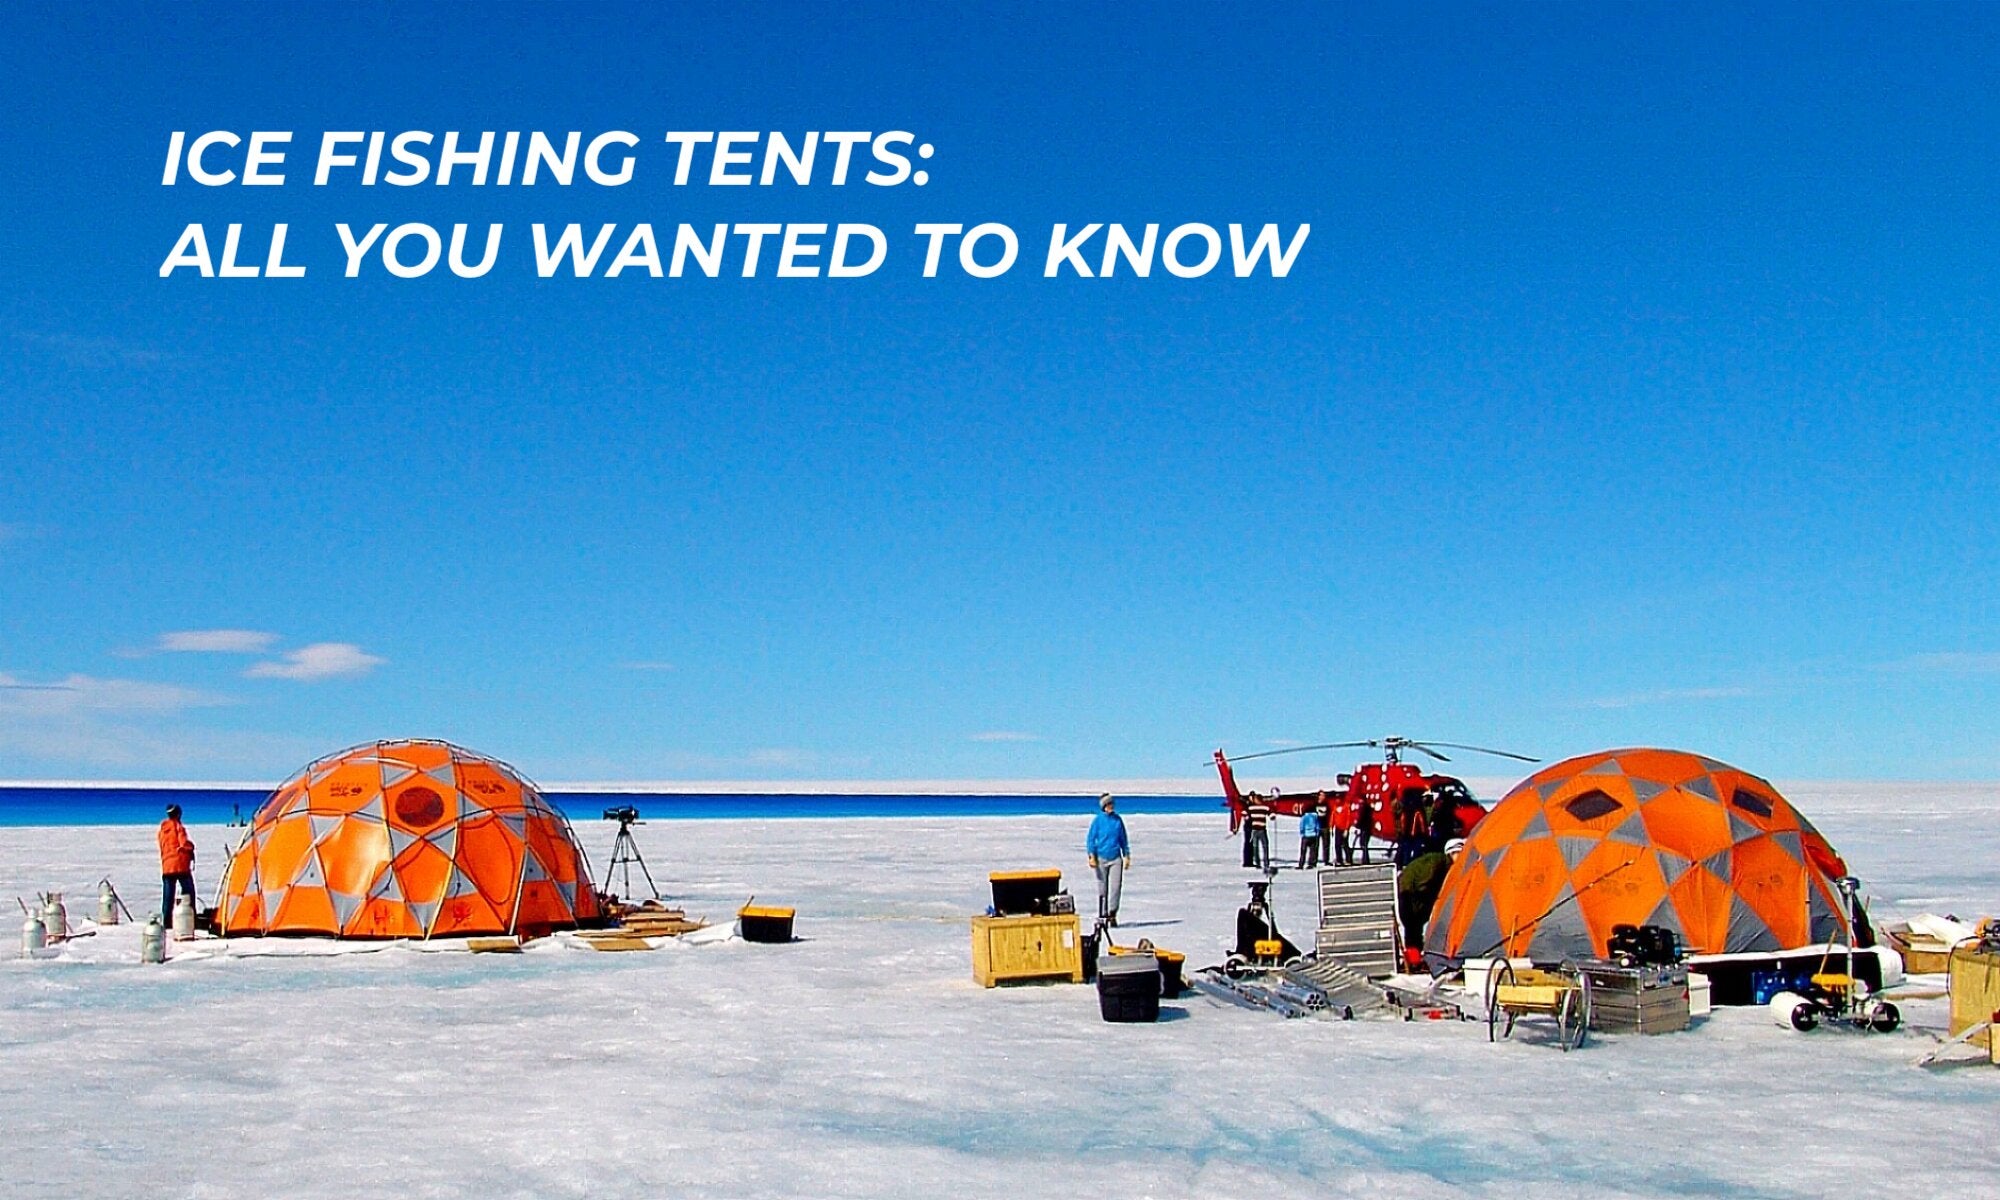 Winter Tents Fishing Insulated, Tent Winter Fishing Eight